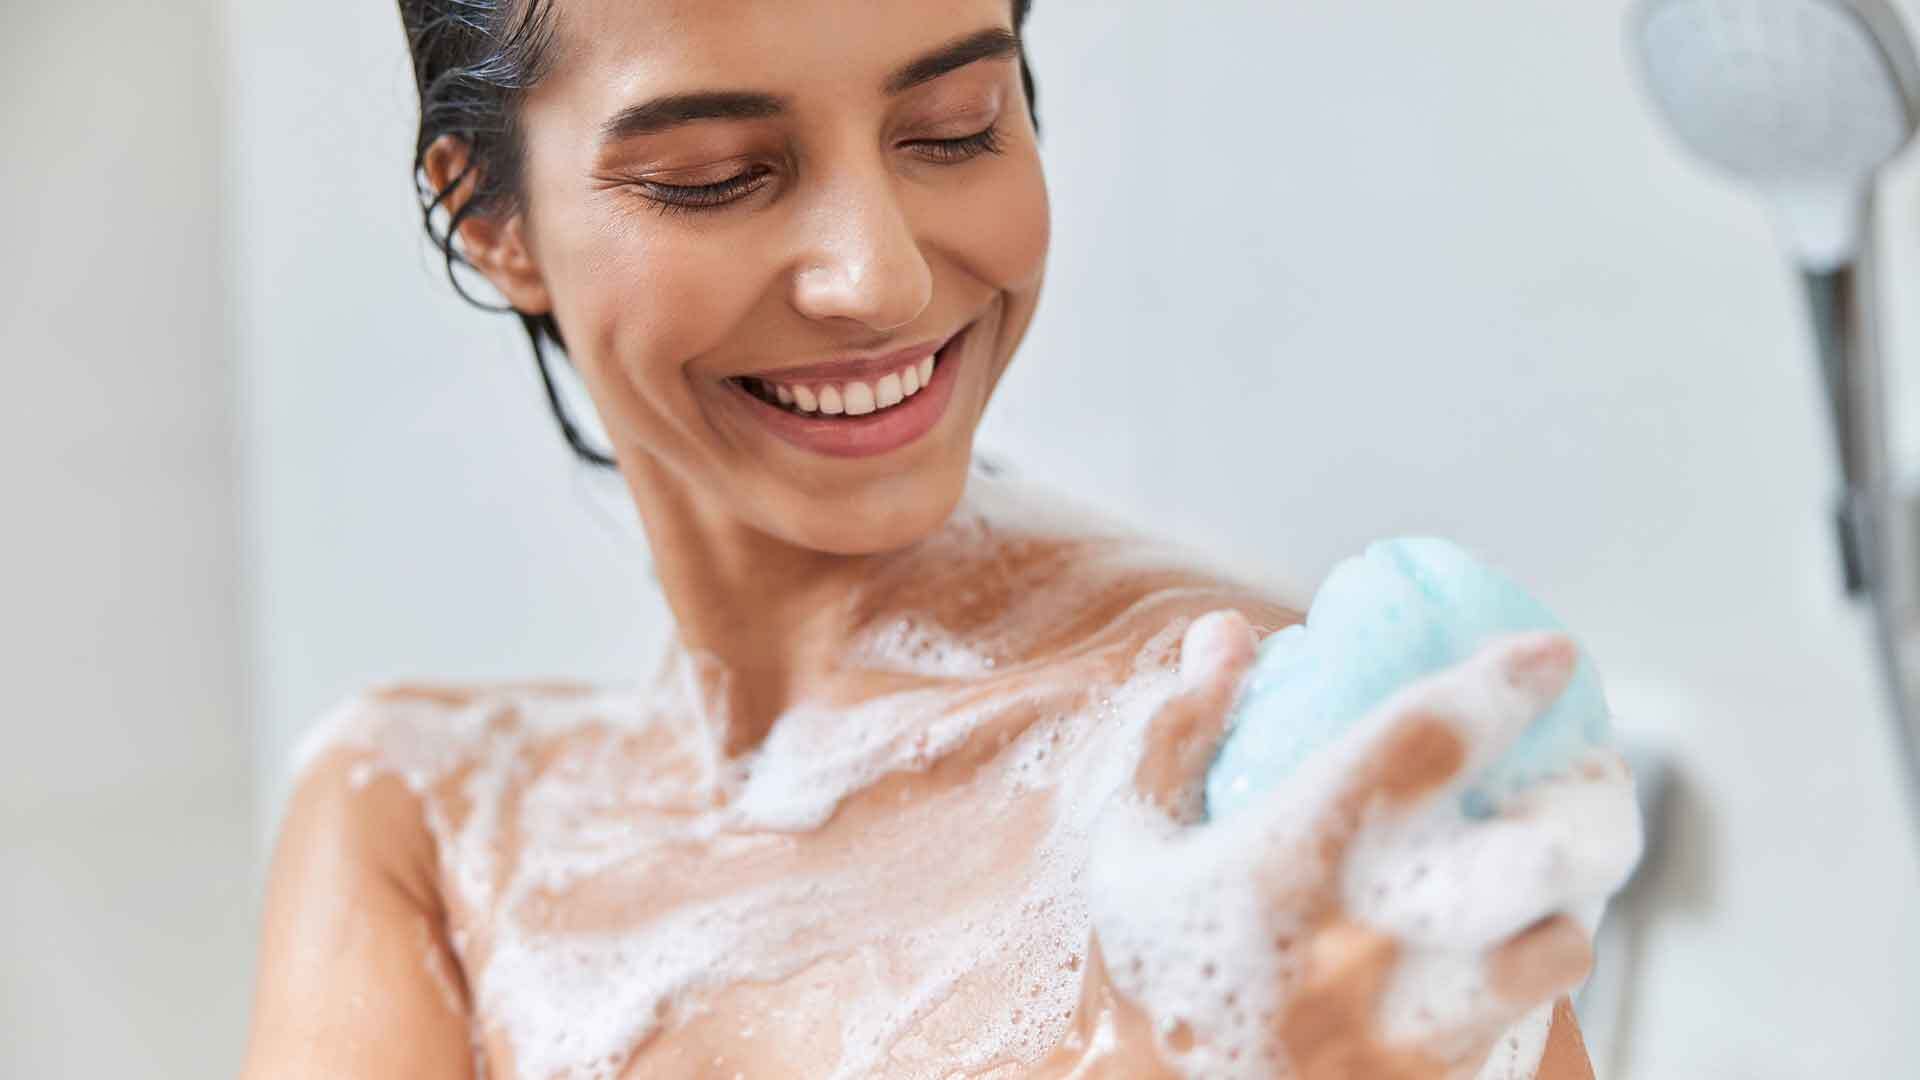 Saving money by non-bathing: is the trend harming skin?